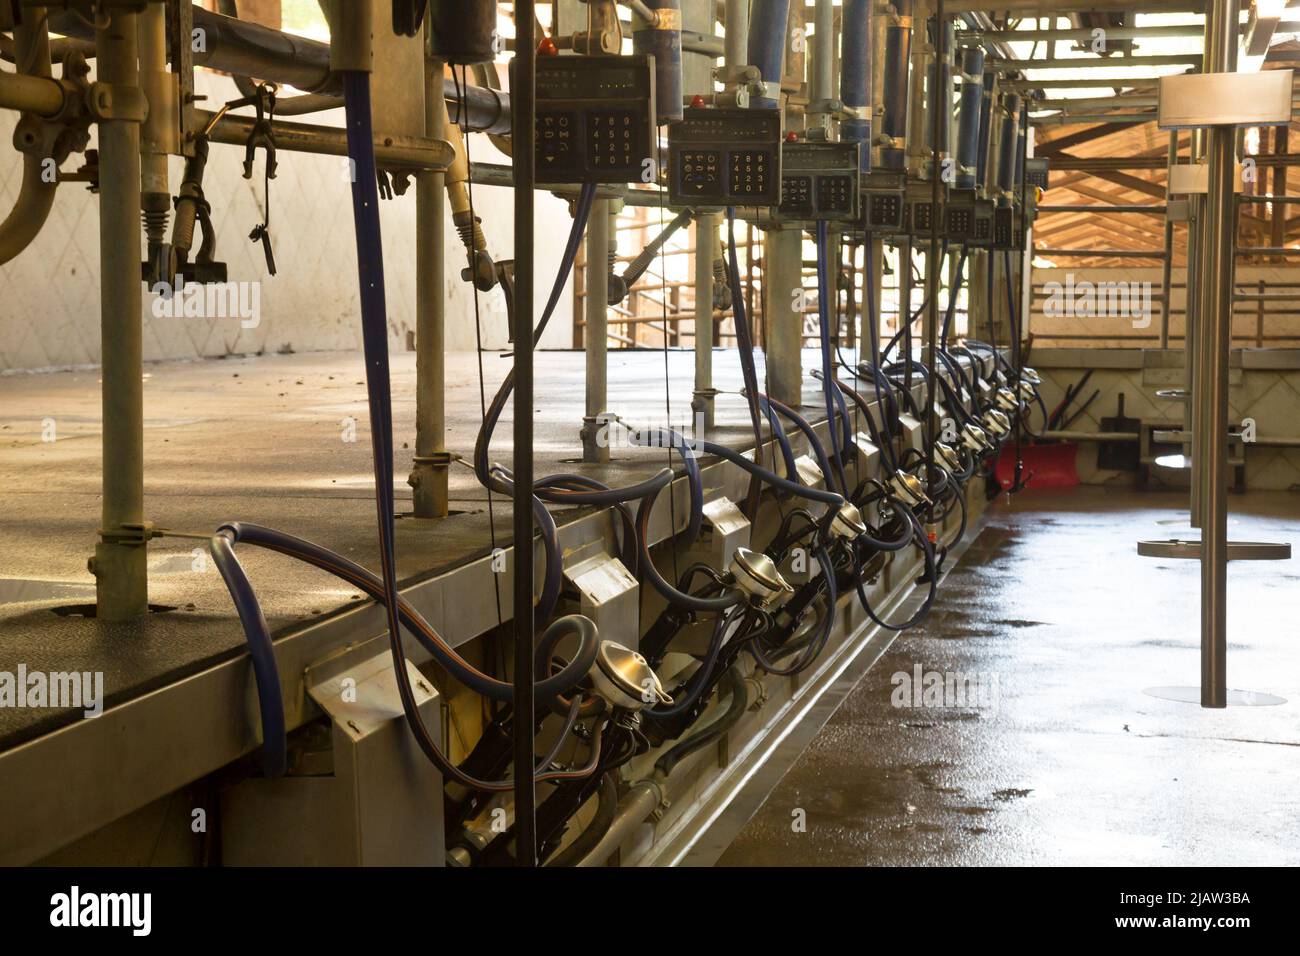 Automated milking line Stock Photo